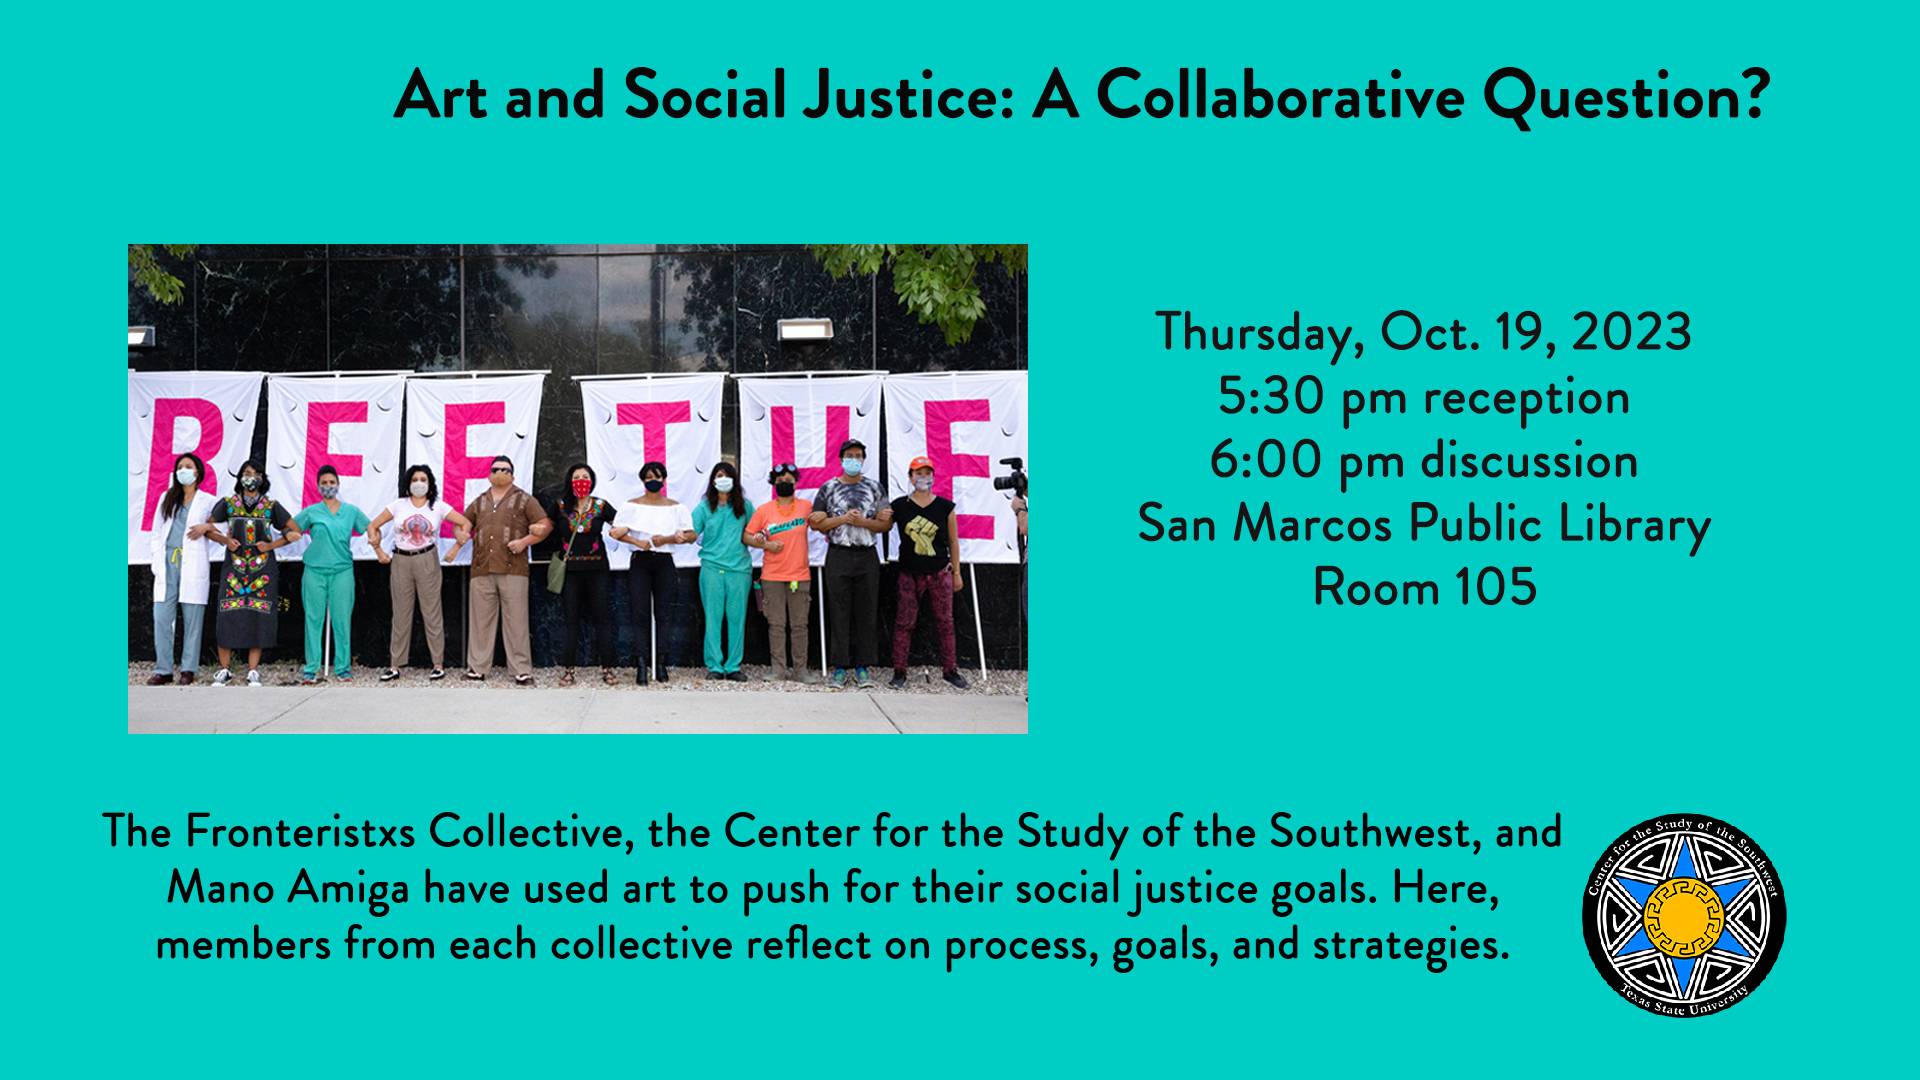 Art and Social Justice: A Collaborative Question?